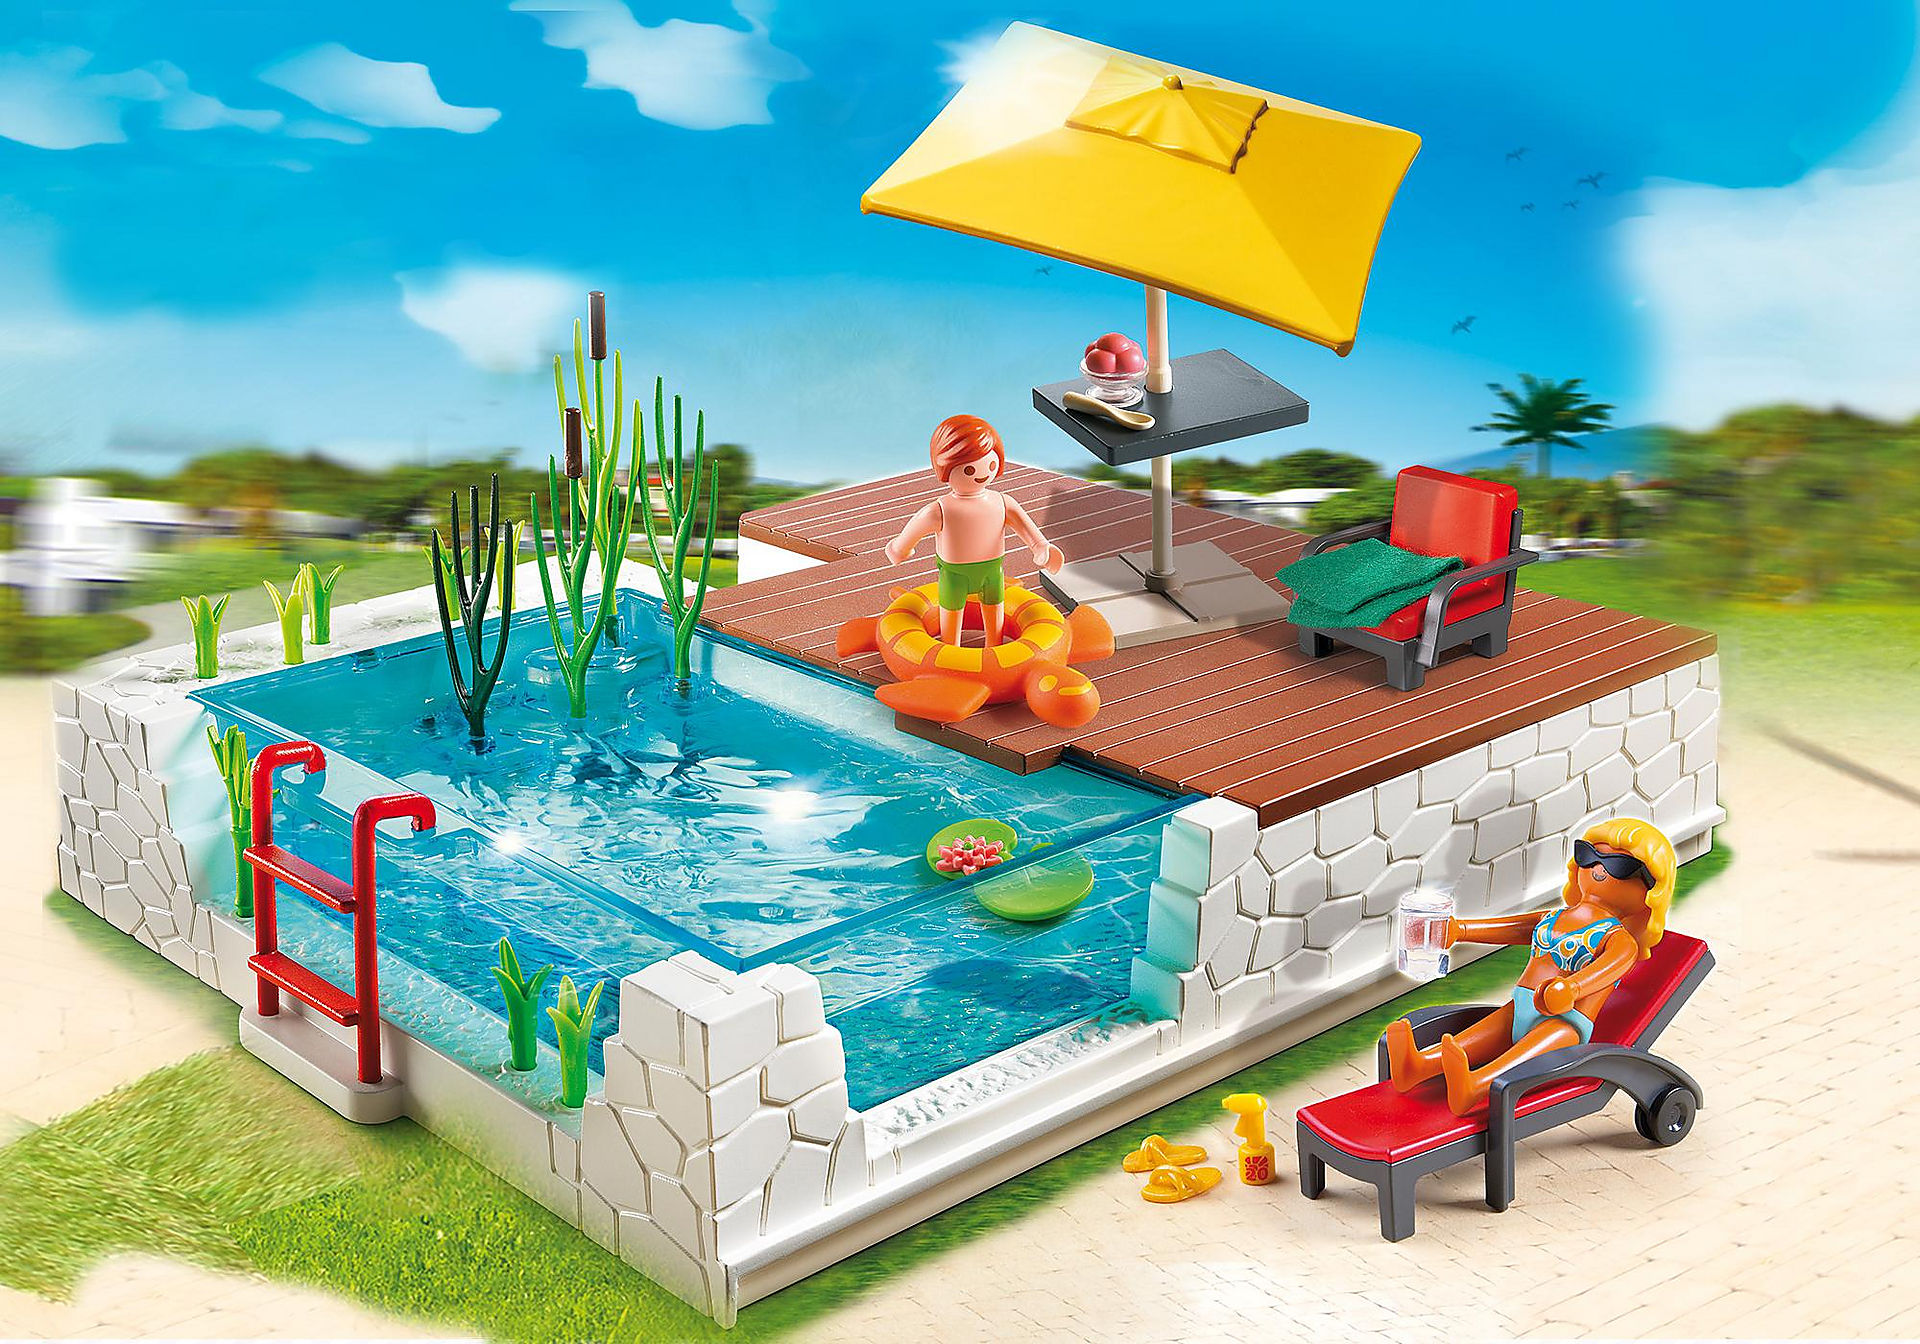 Swimming Pool with Terrace - 5575 | PLAYMOBIL®